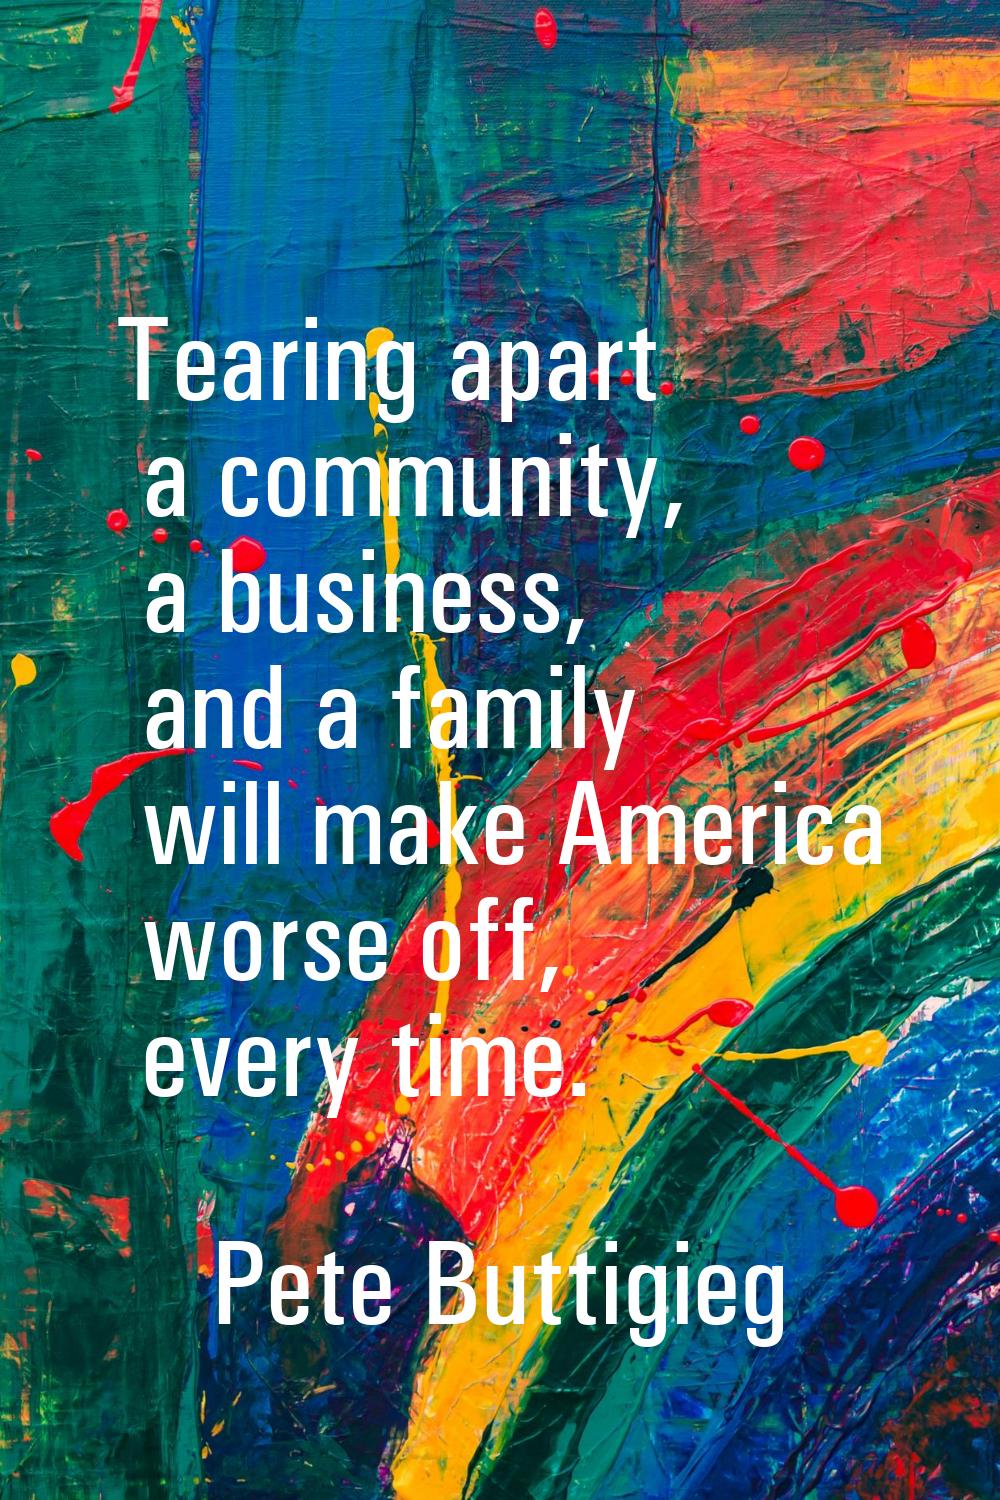 Tearing apart a community, a business, and a family will make America worse off, every time.